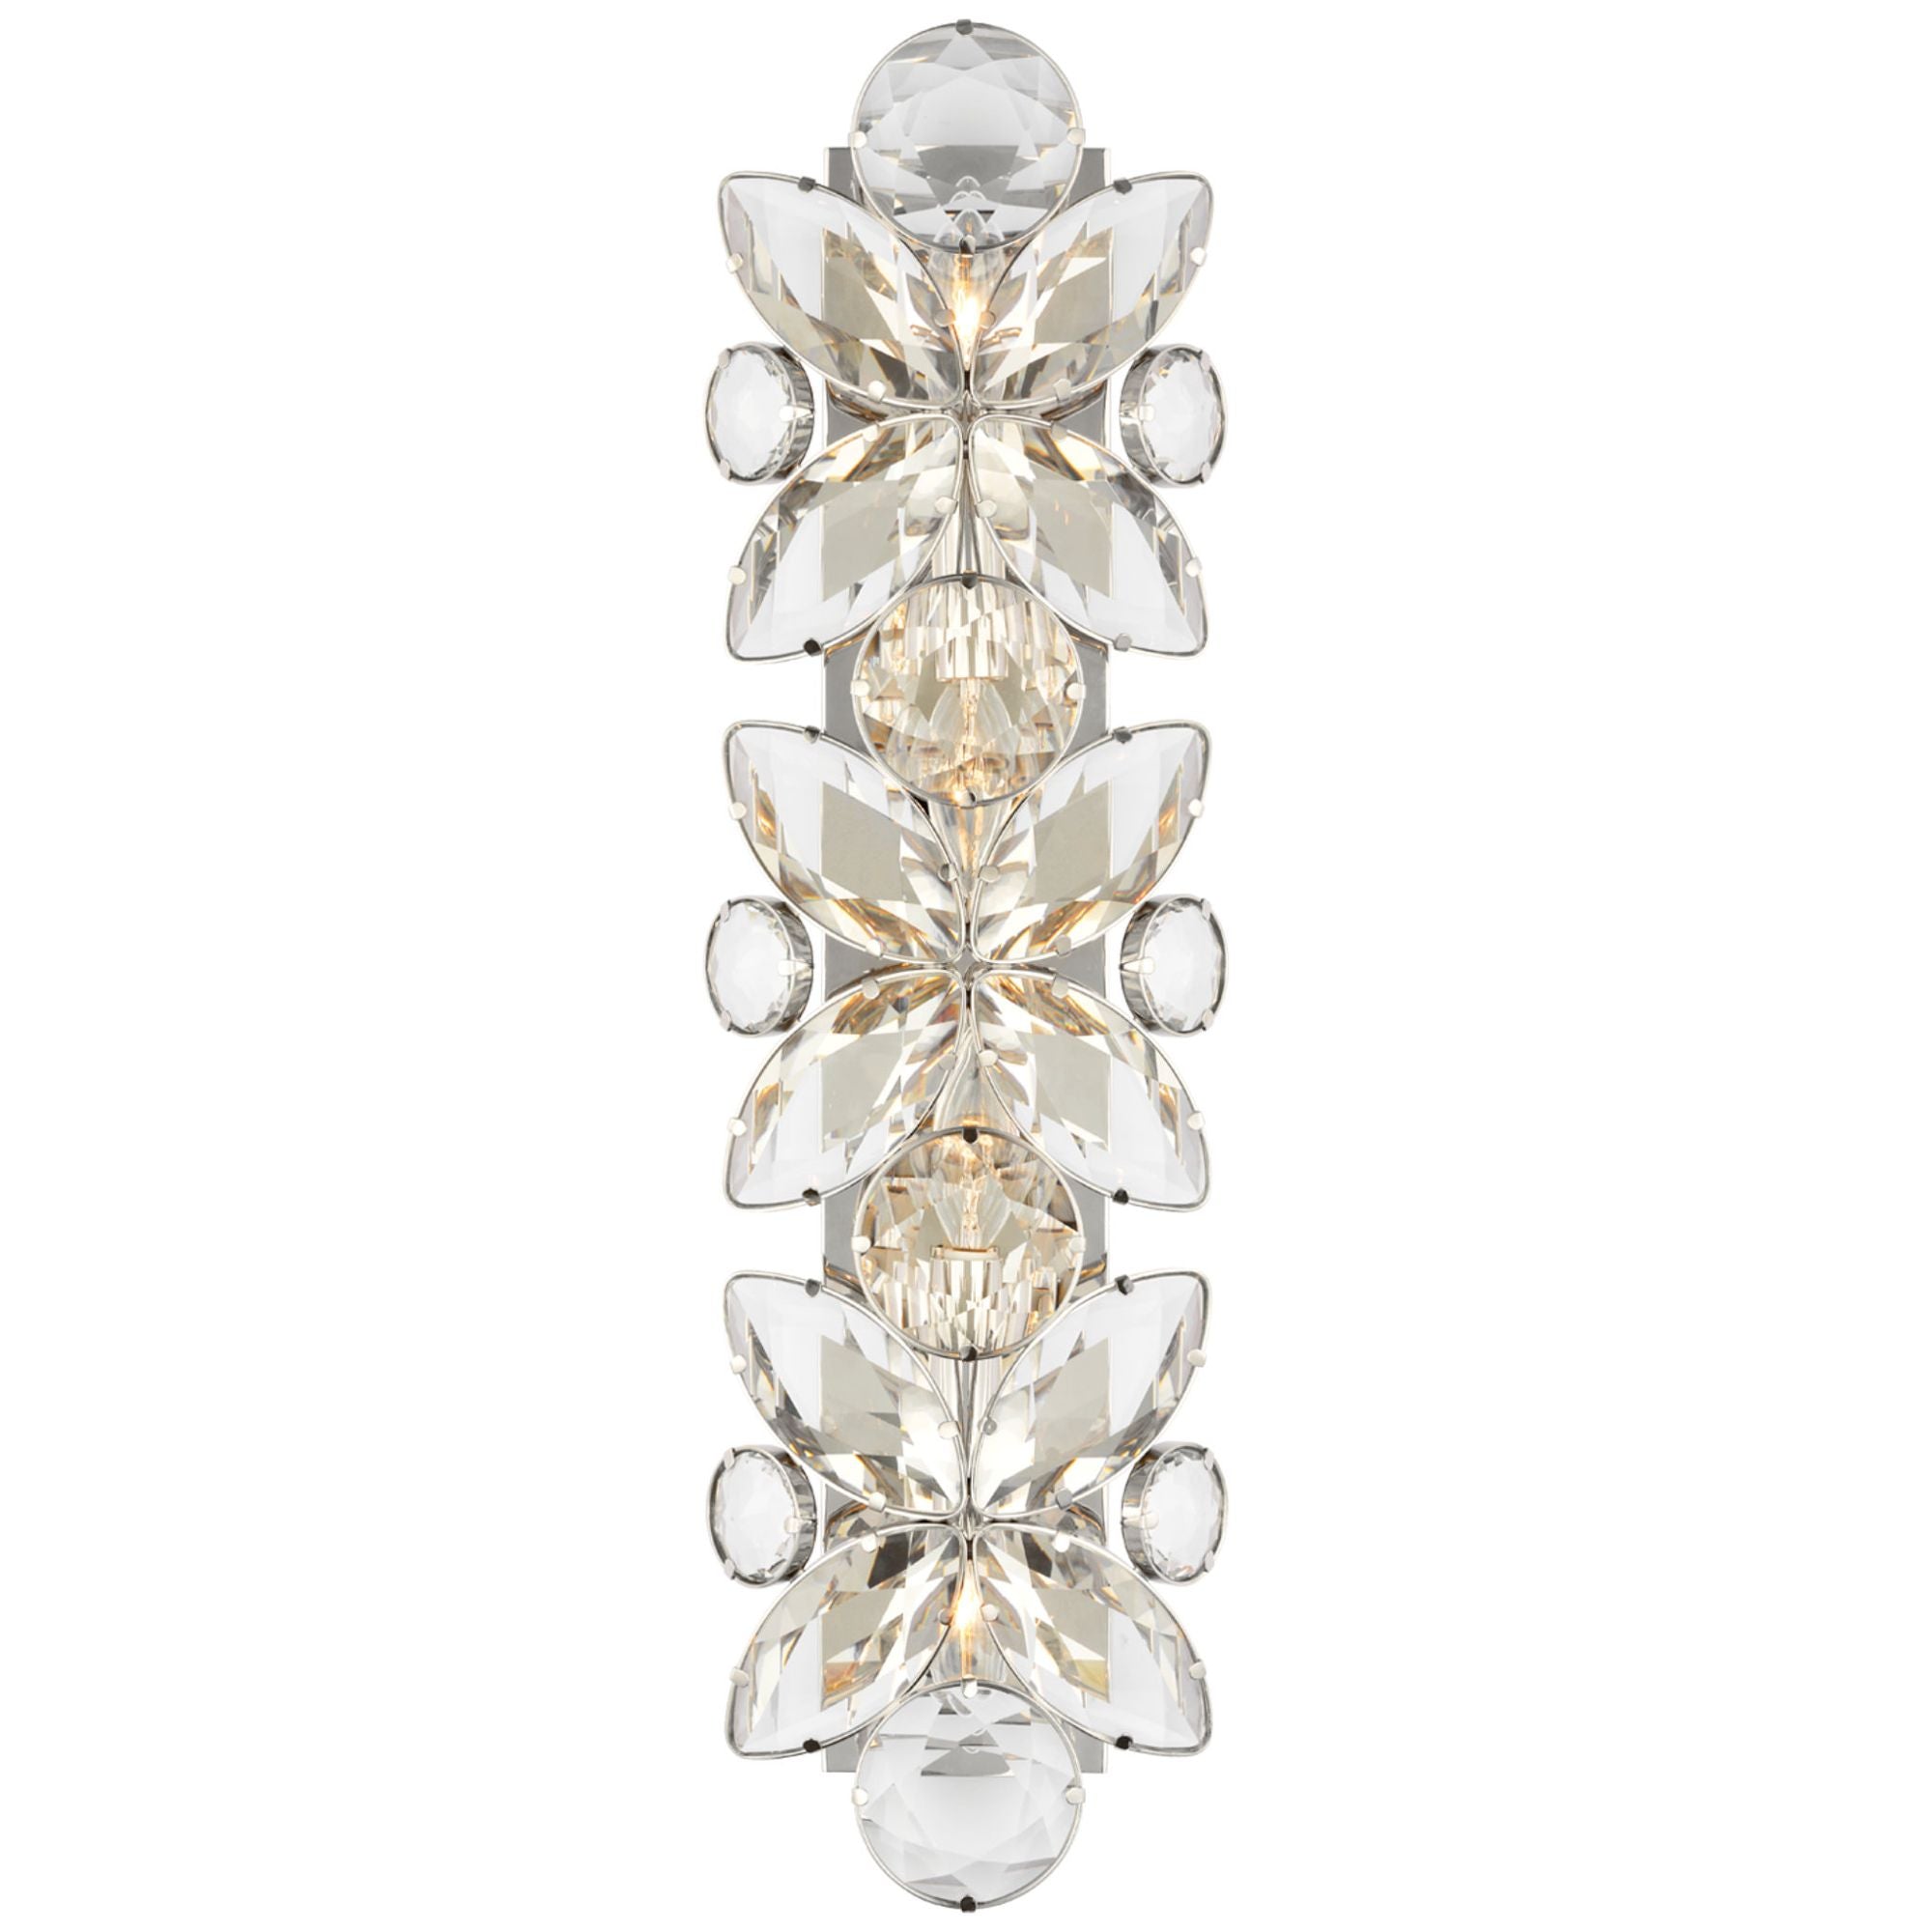 kate spade new york Lloyd 26" Sconce in Polished Nickel with Crystal